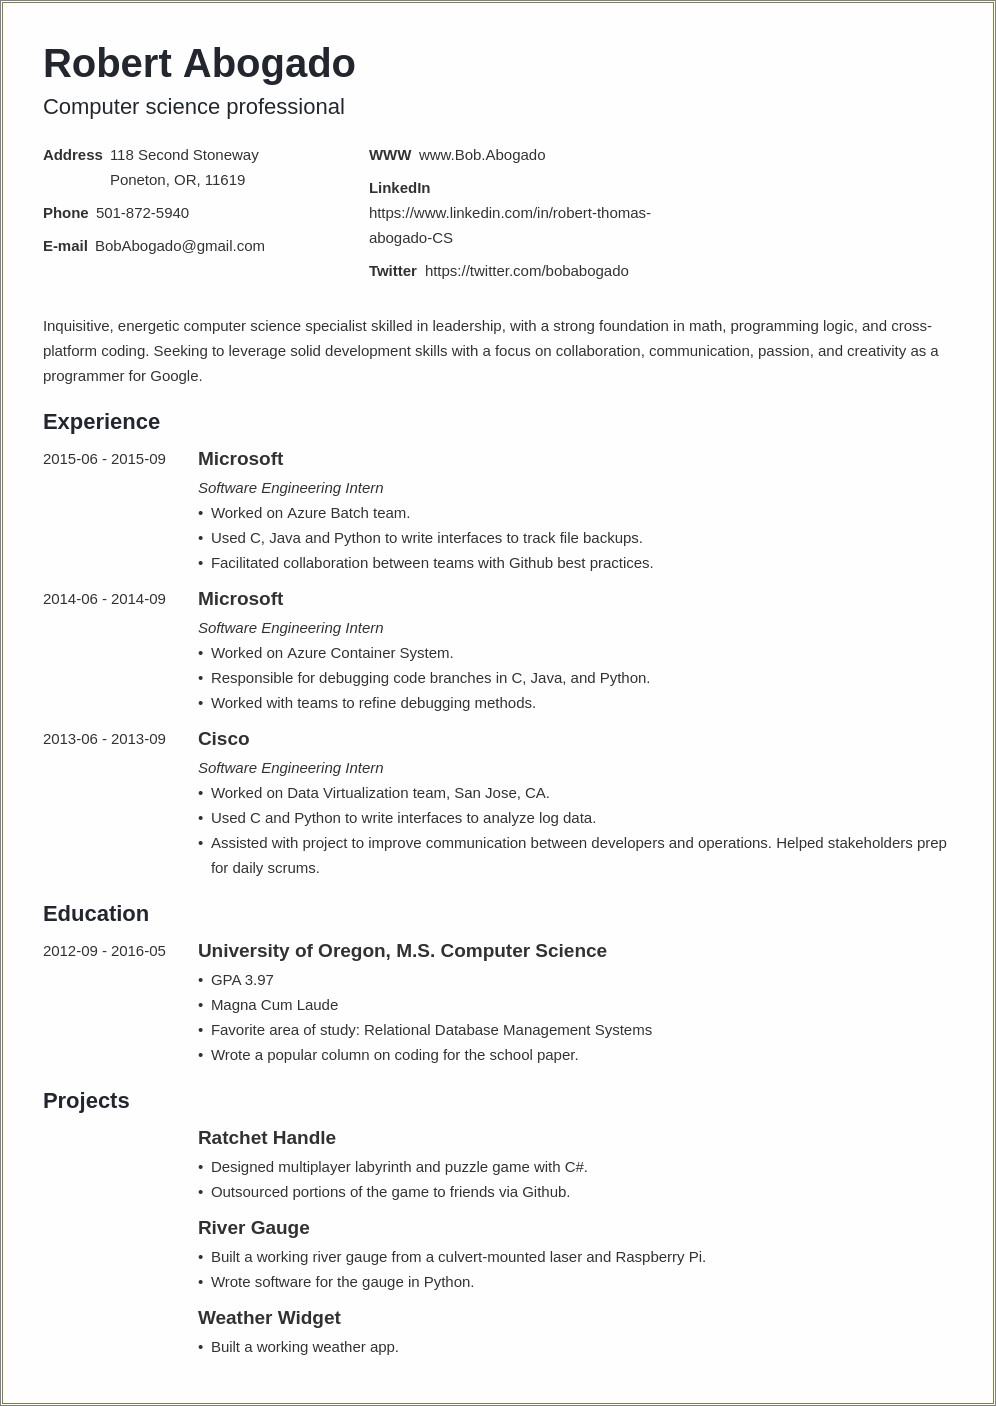 Resume Format For Computer Science Engineering Experience